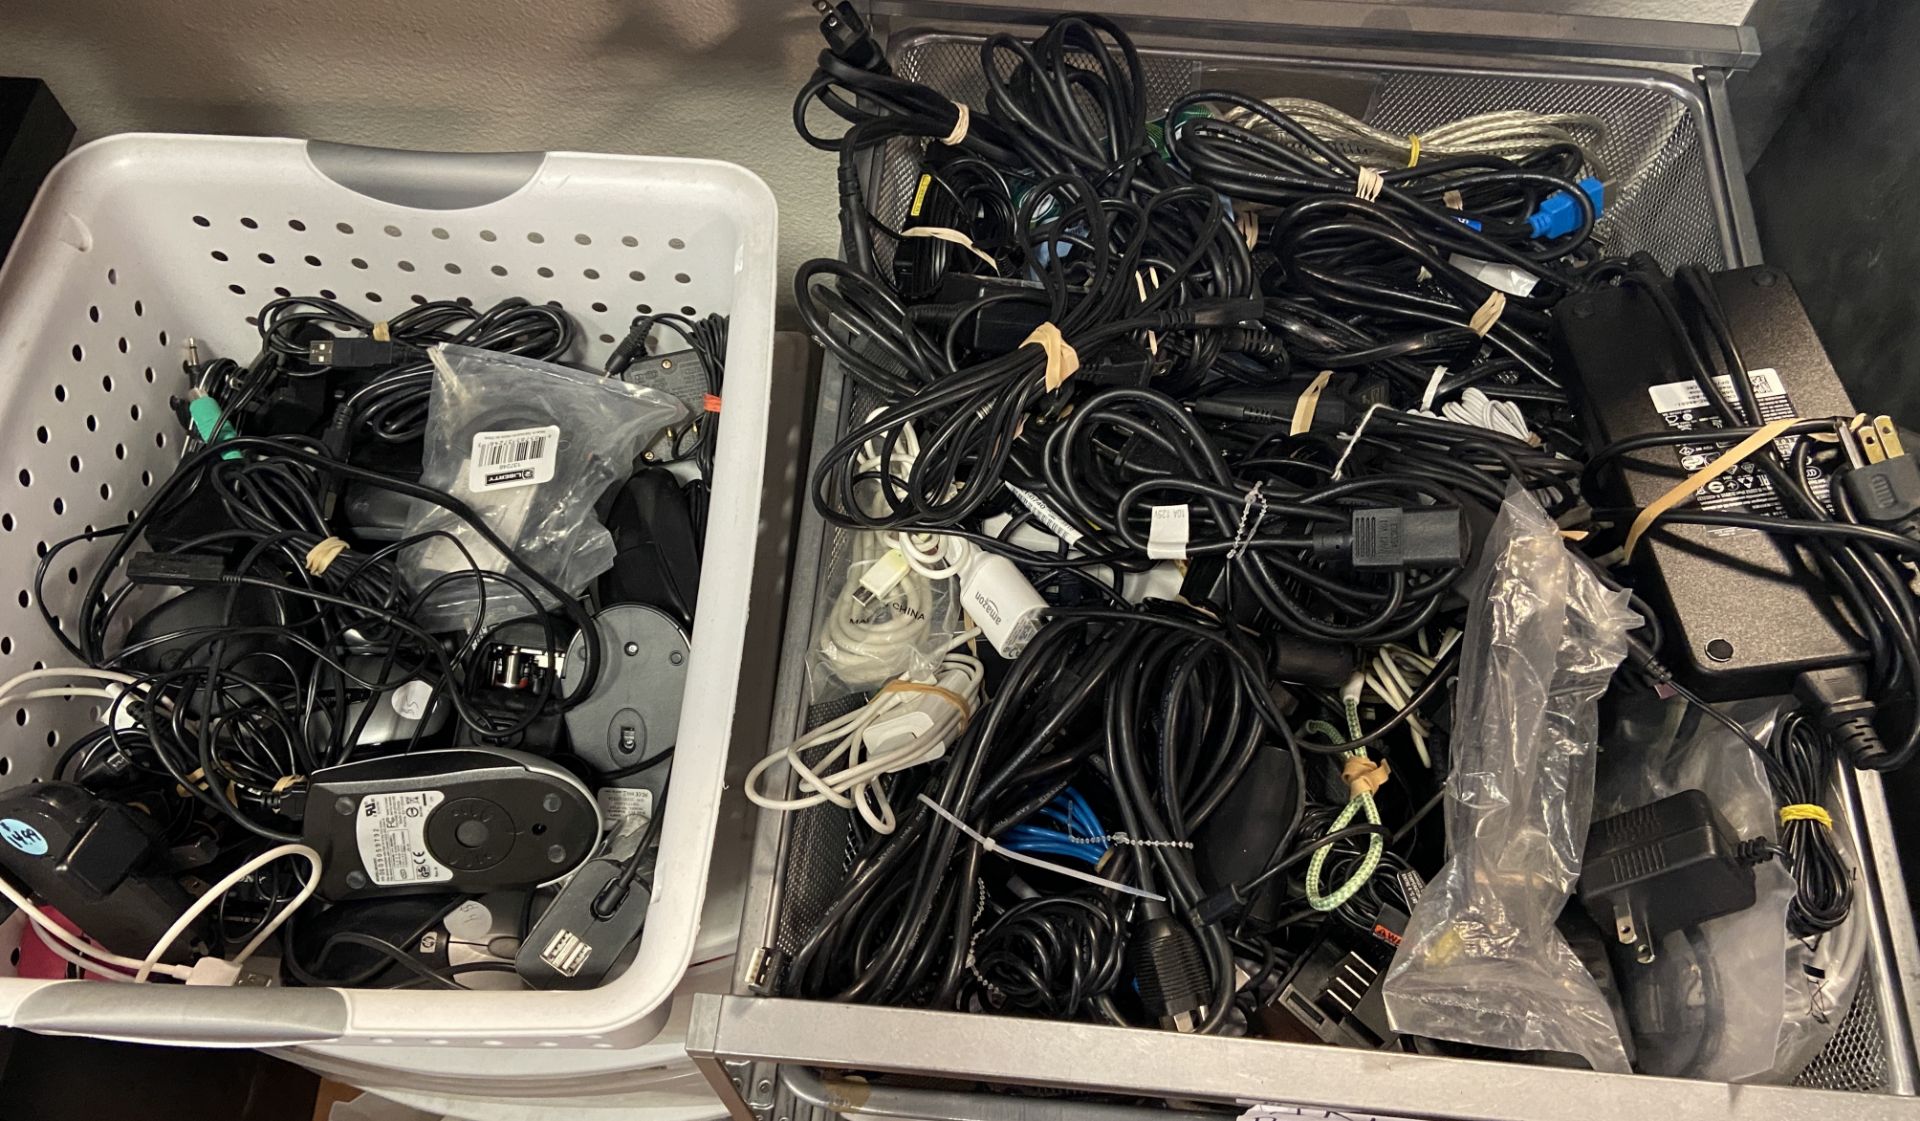 Assorted computer chargers, cords and mice